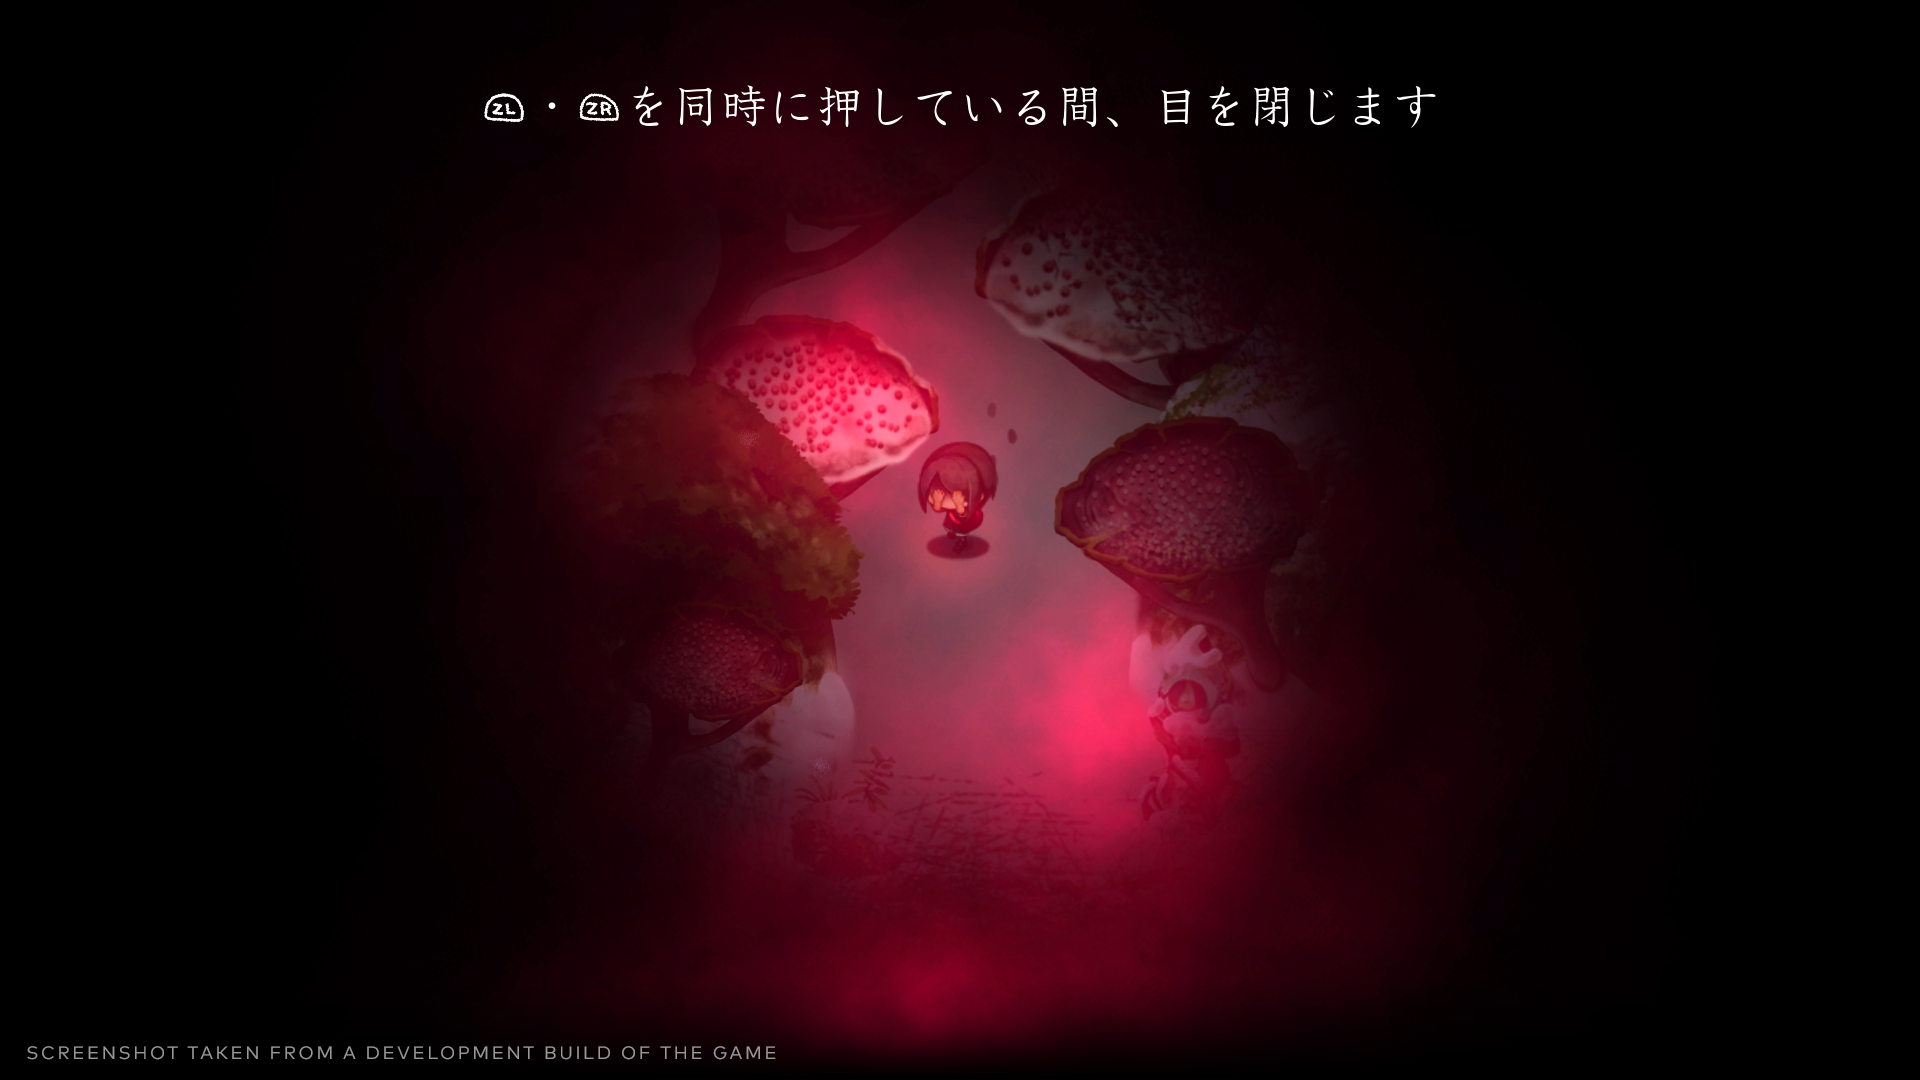 Yomawari: Lost in the Dark - Limited Edition - PS4®